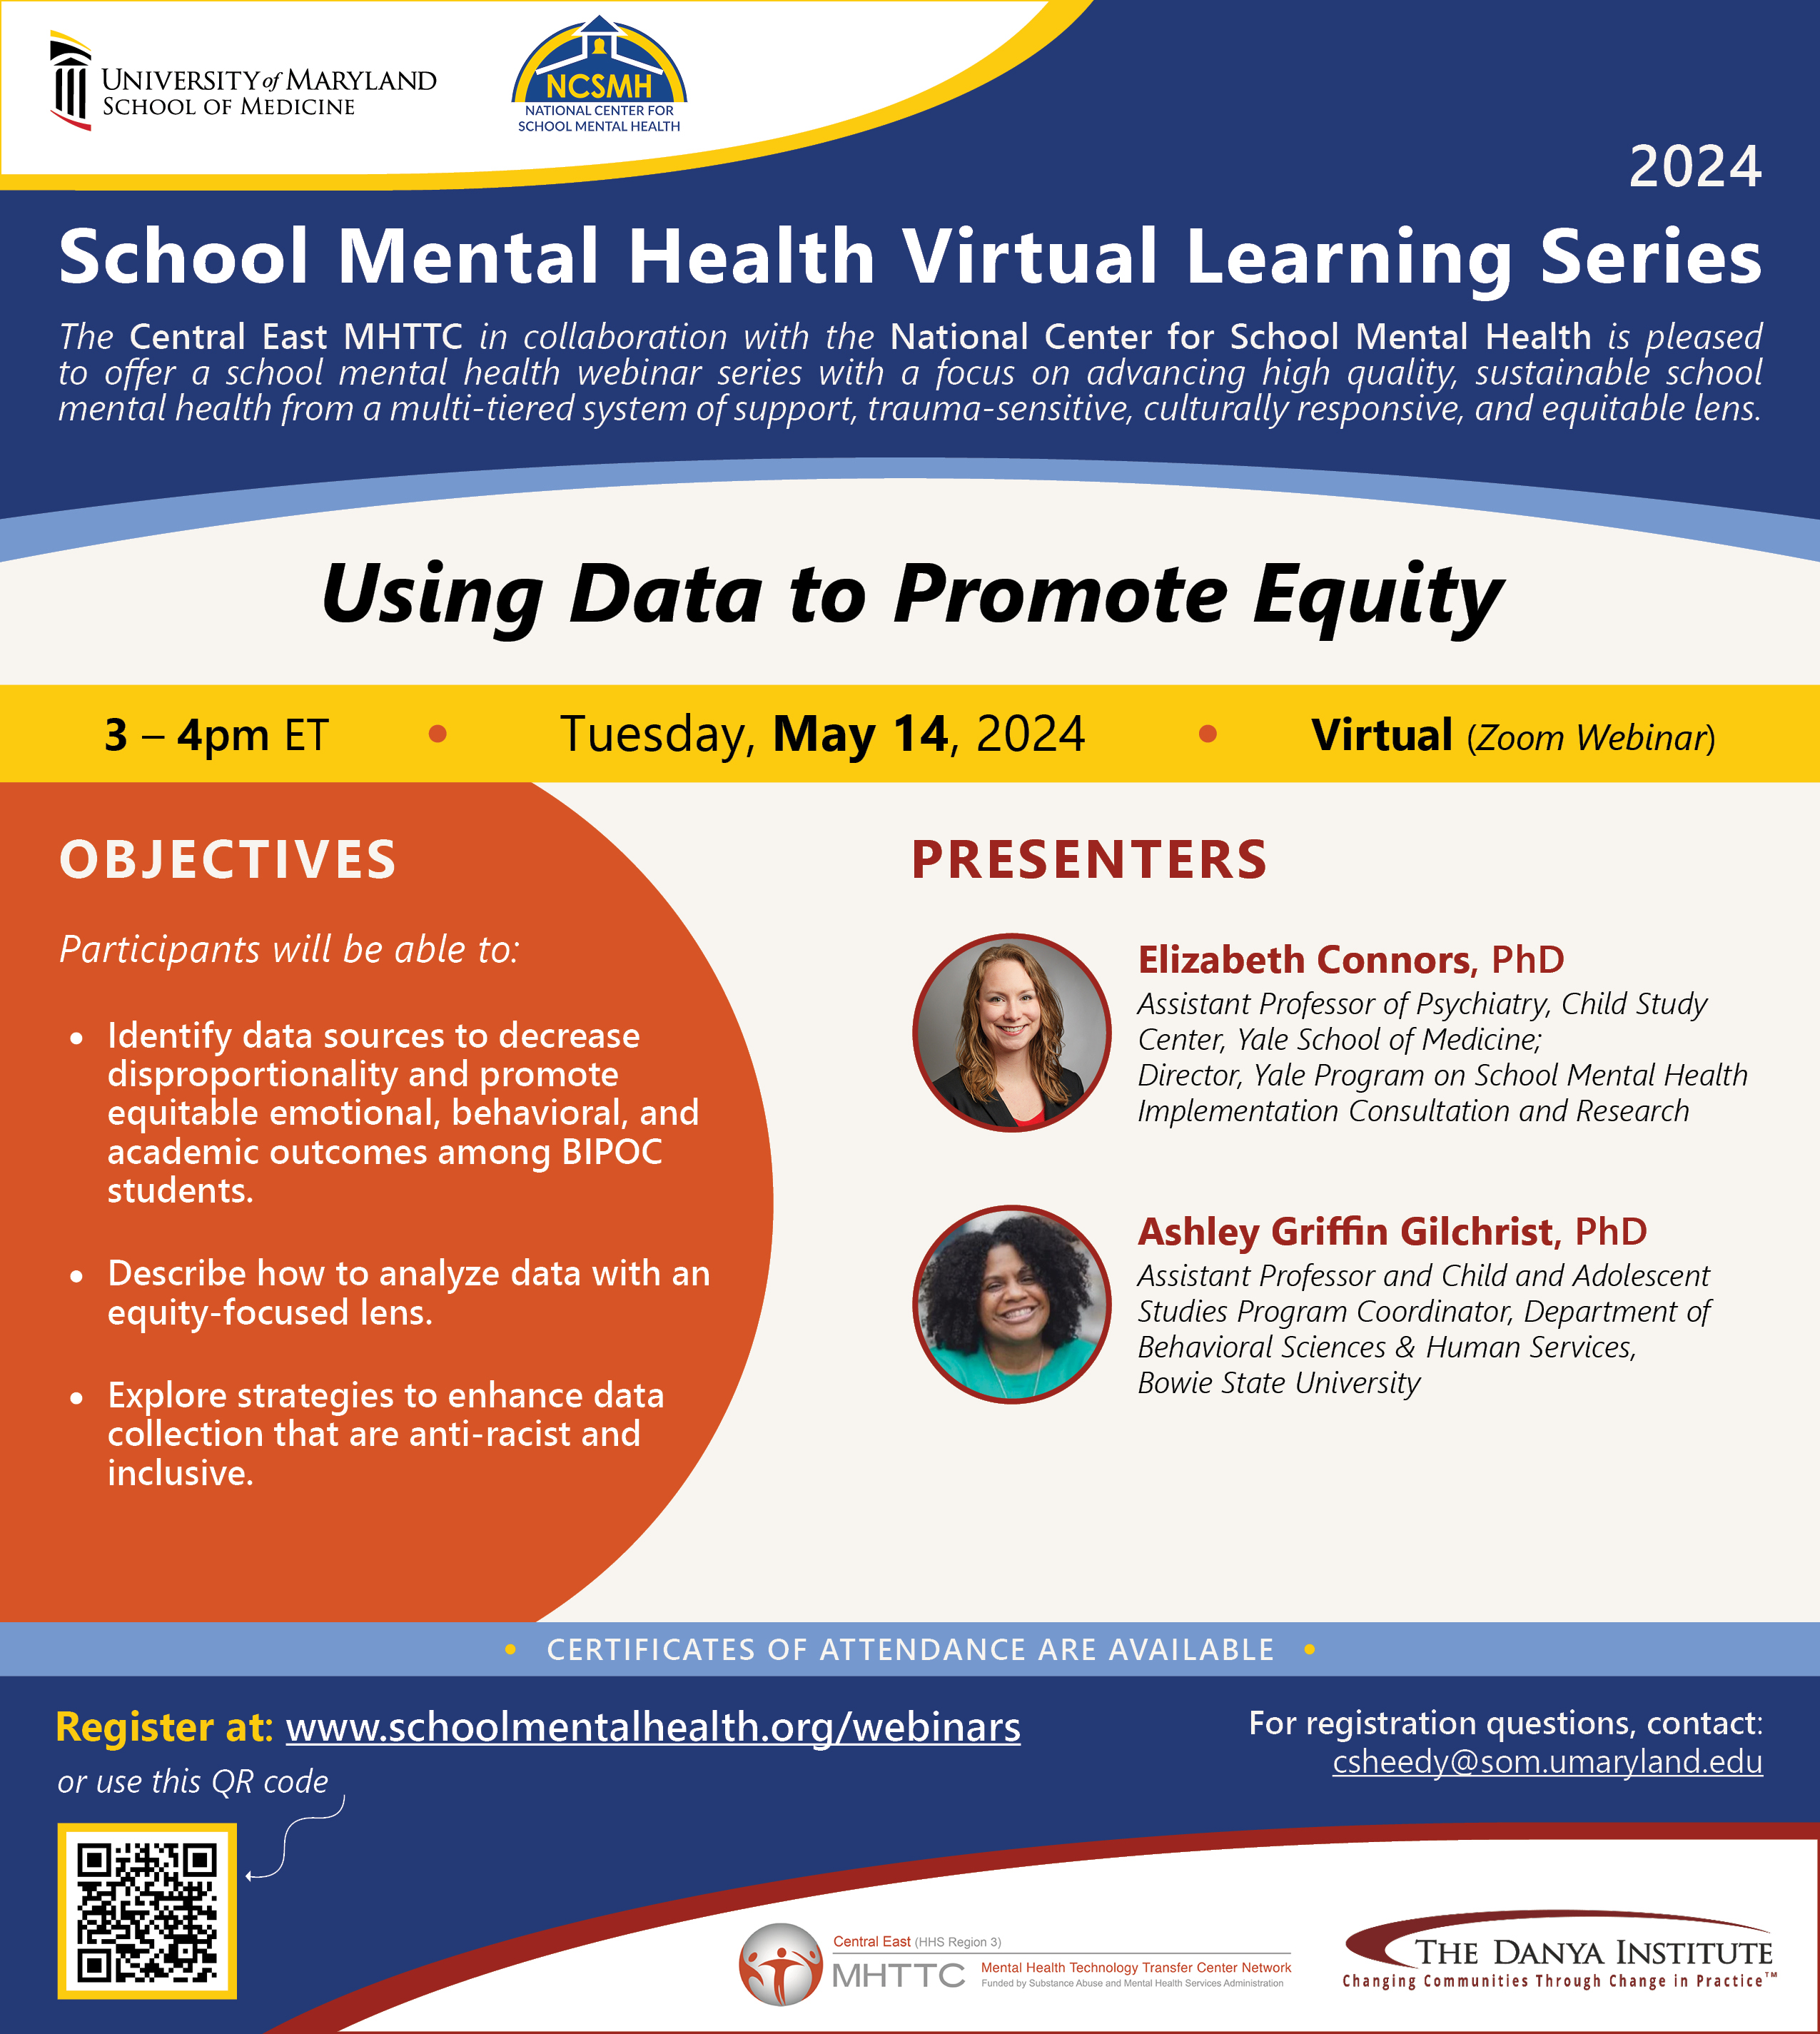 School Mental Health Virtual Learning Series: Strategies for Discussing Race, Racial Discrimination, and Racial Trauma with Youth. Presenters: Nicole L Cammack, PhD, Dana L Cunningham, PhD, Jessica S Henry, PhD.